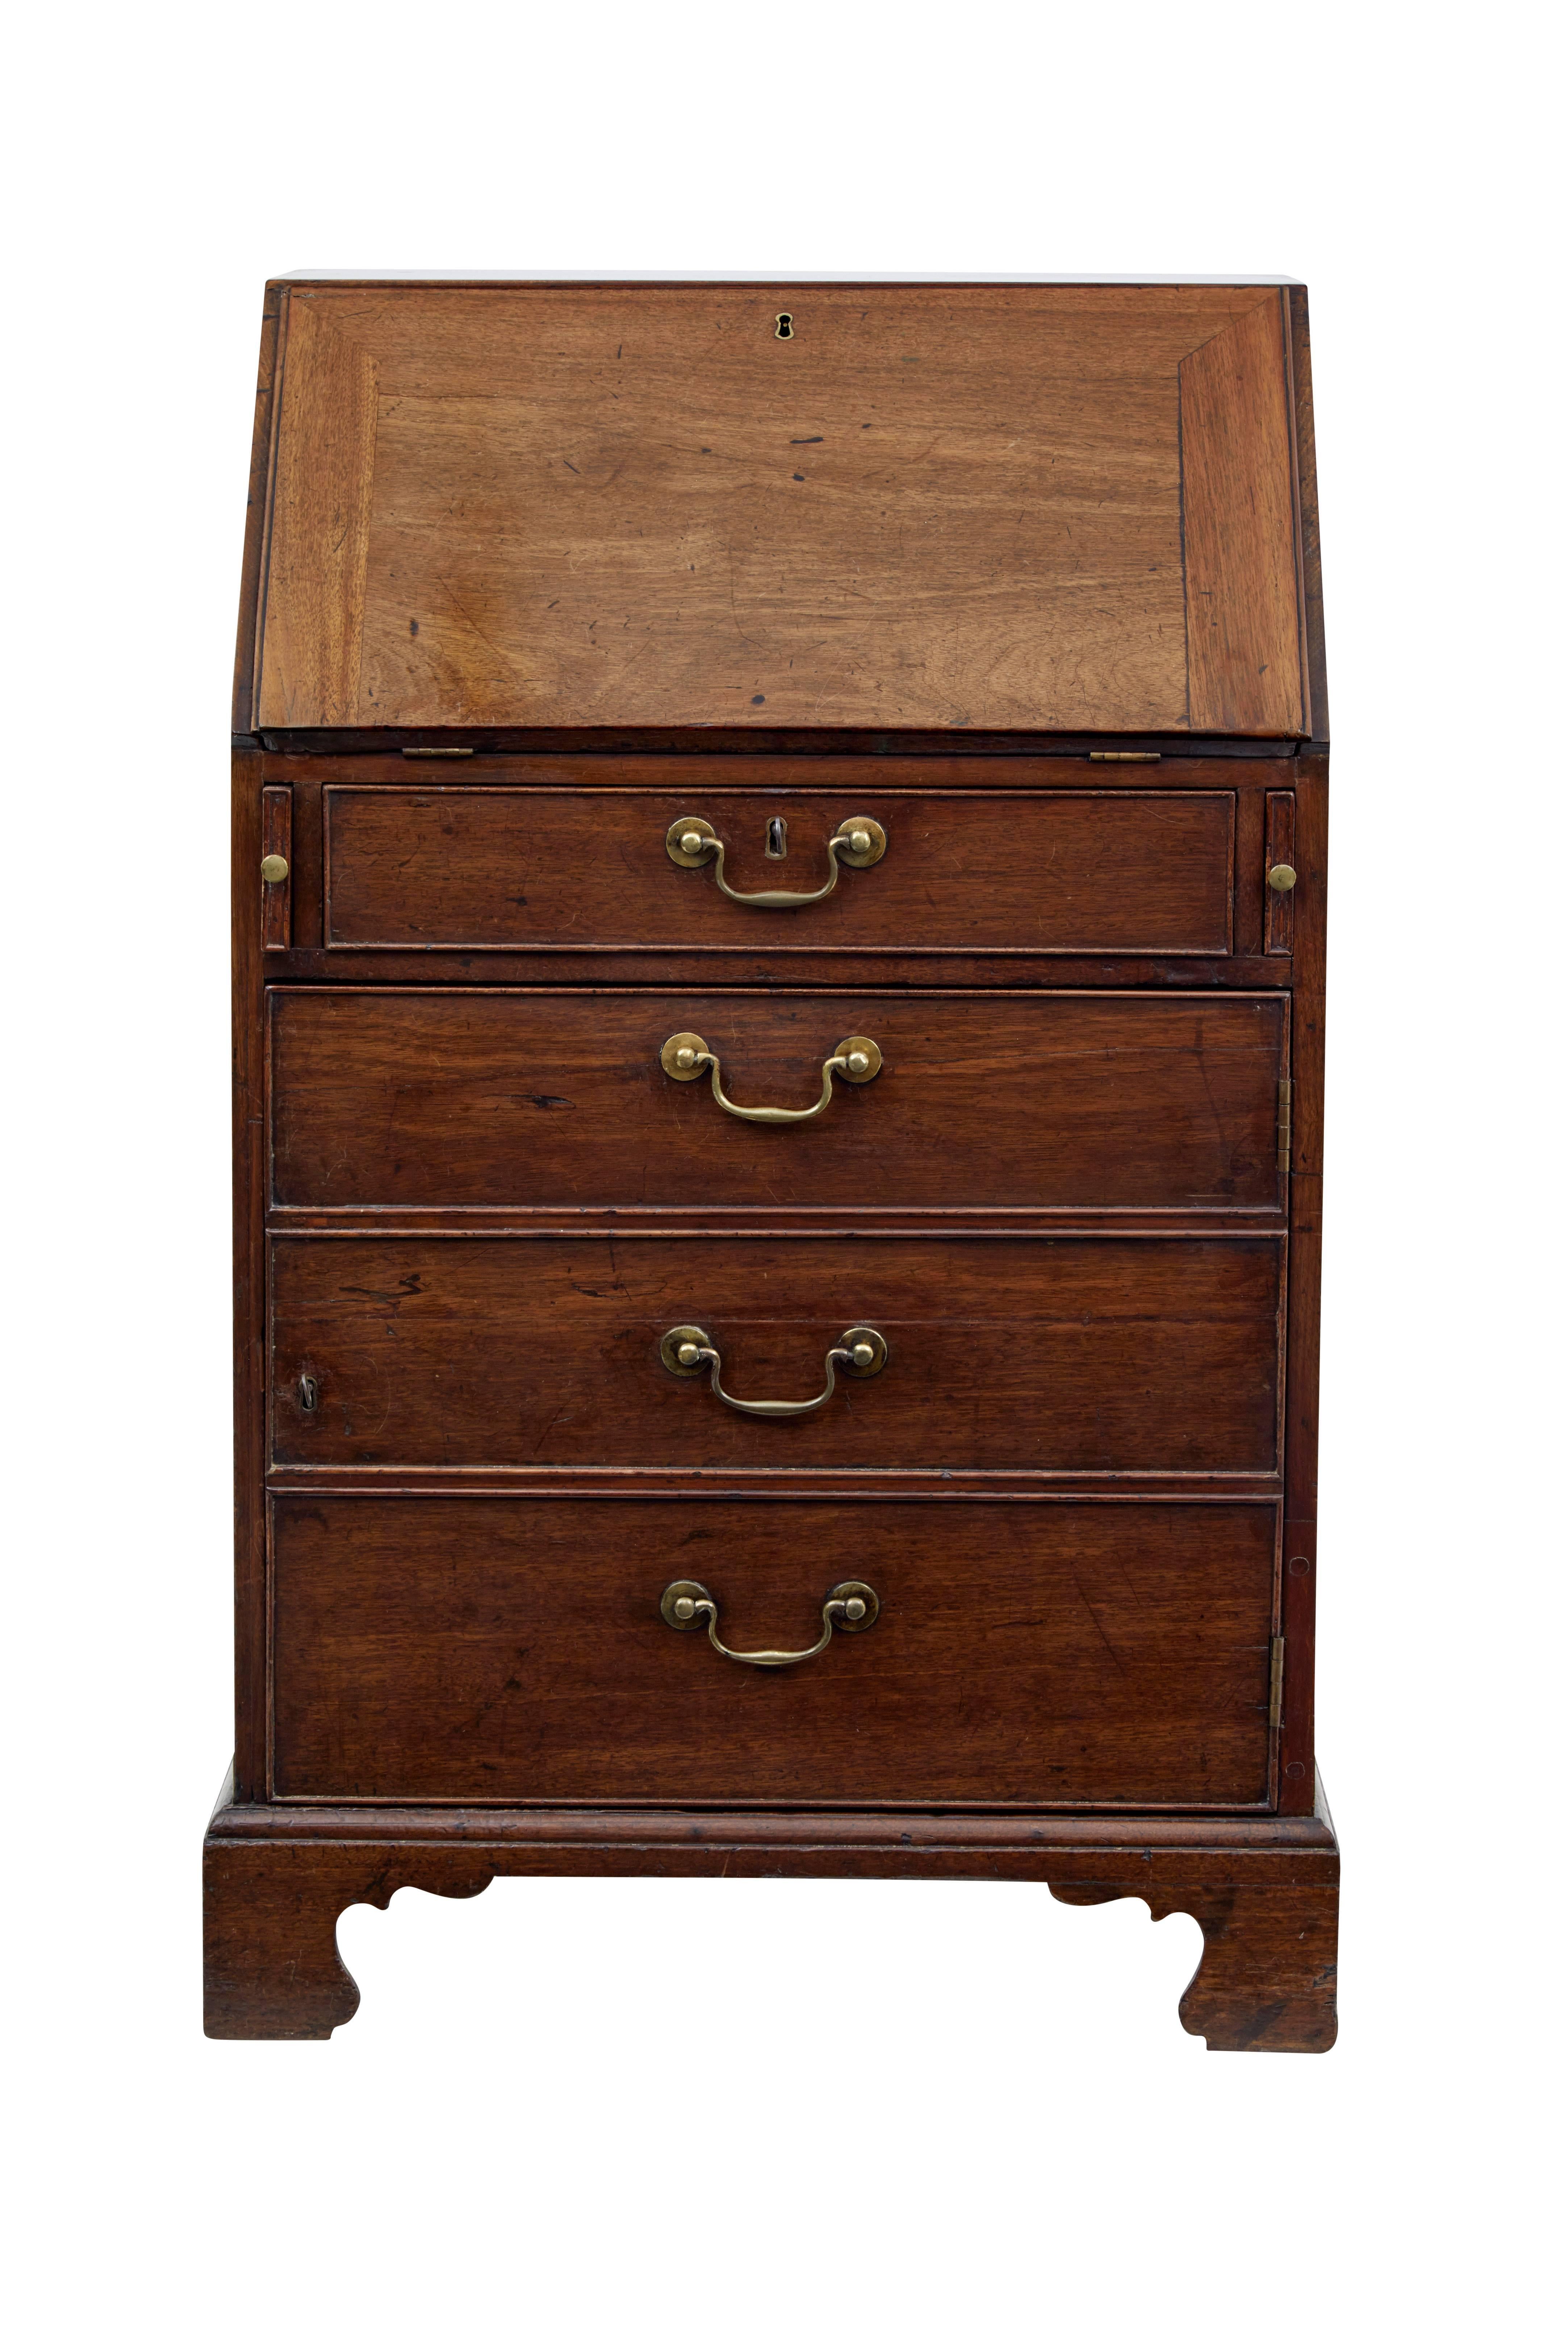 Good quality mahogany and pine bureau, circa 1790.
Of desirable small proportions, ideal for everyday use in the modern age.
Original color and patina.
Faux graduating drawers to the front with original handles which acts as a single door cupboard